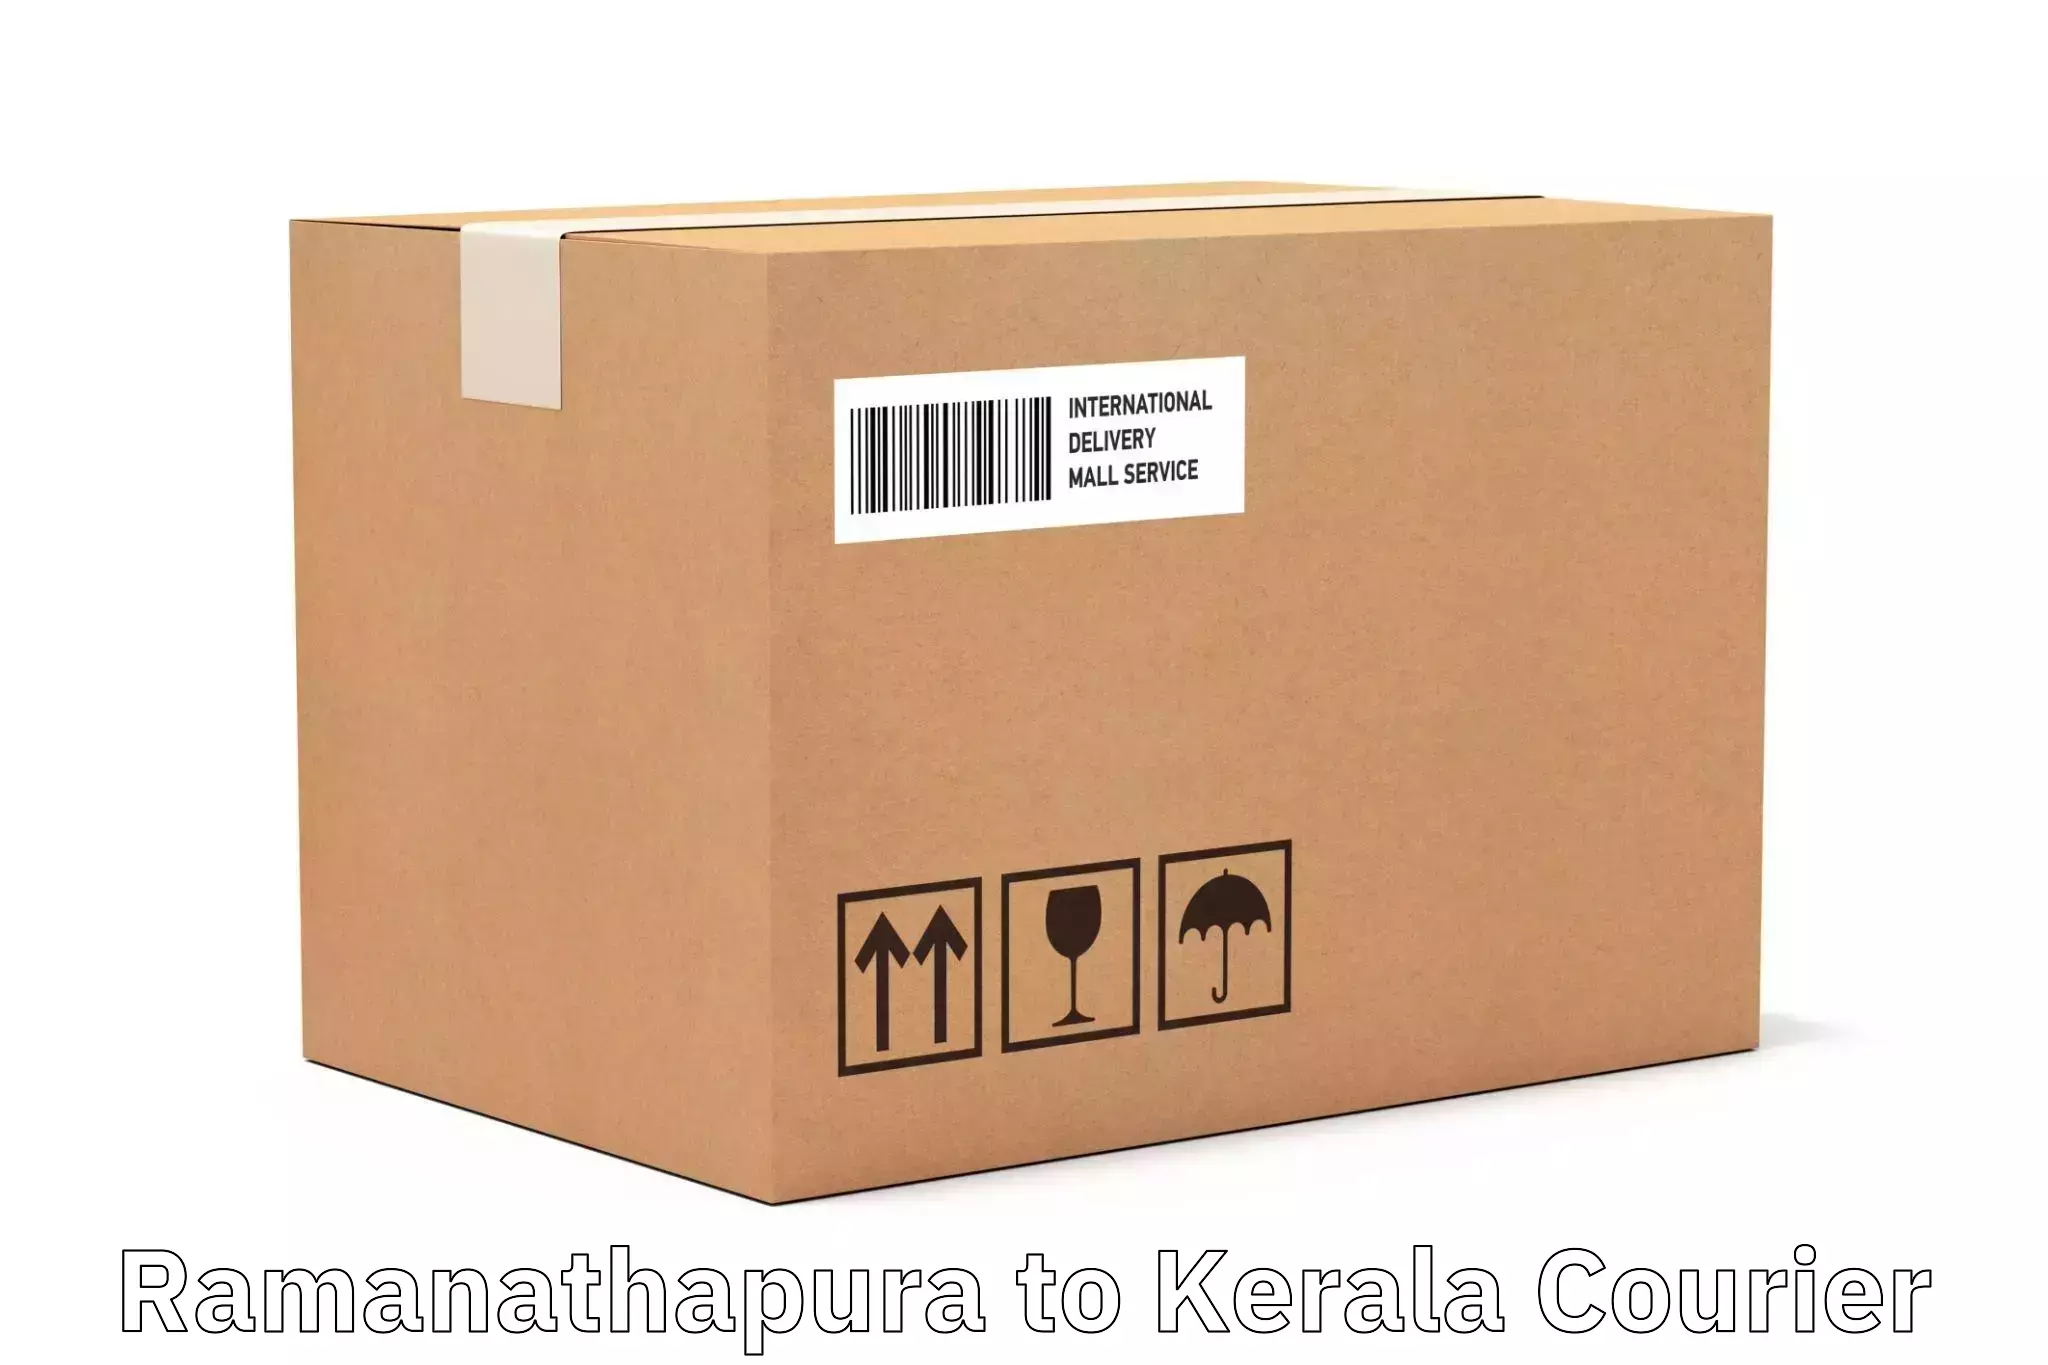 State-of-the-art courier technology Ramanathapura to Olavakkot